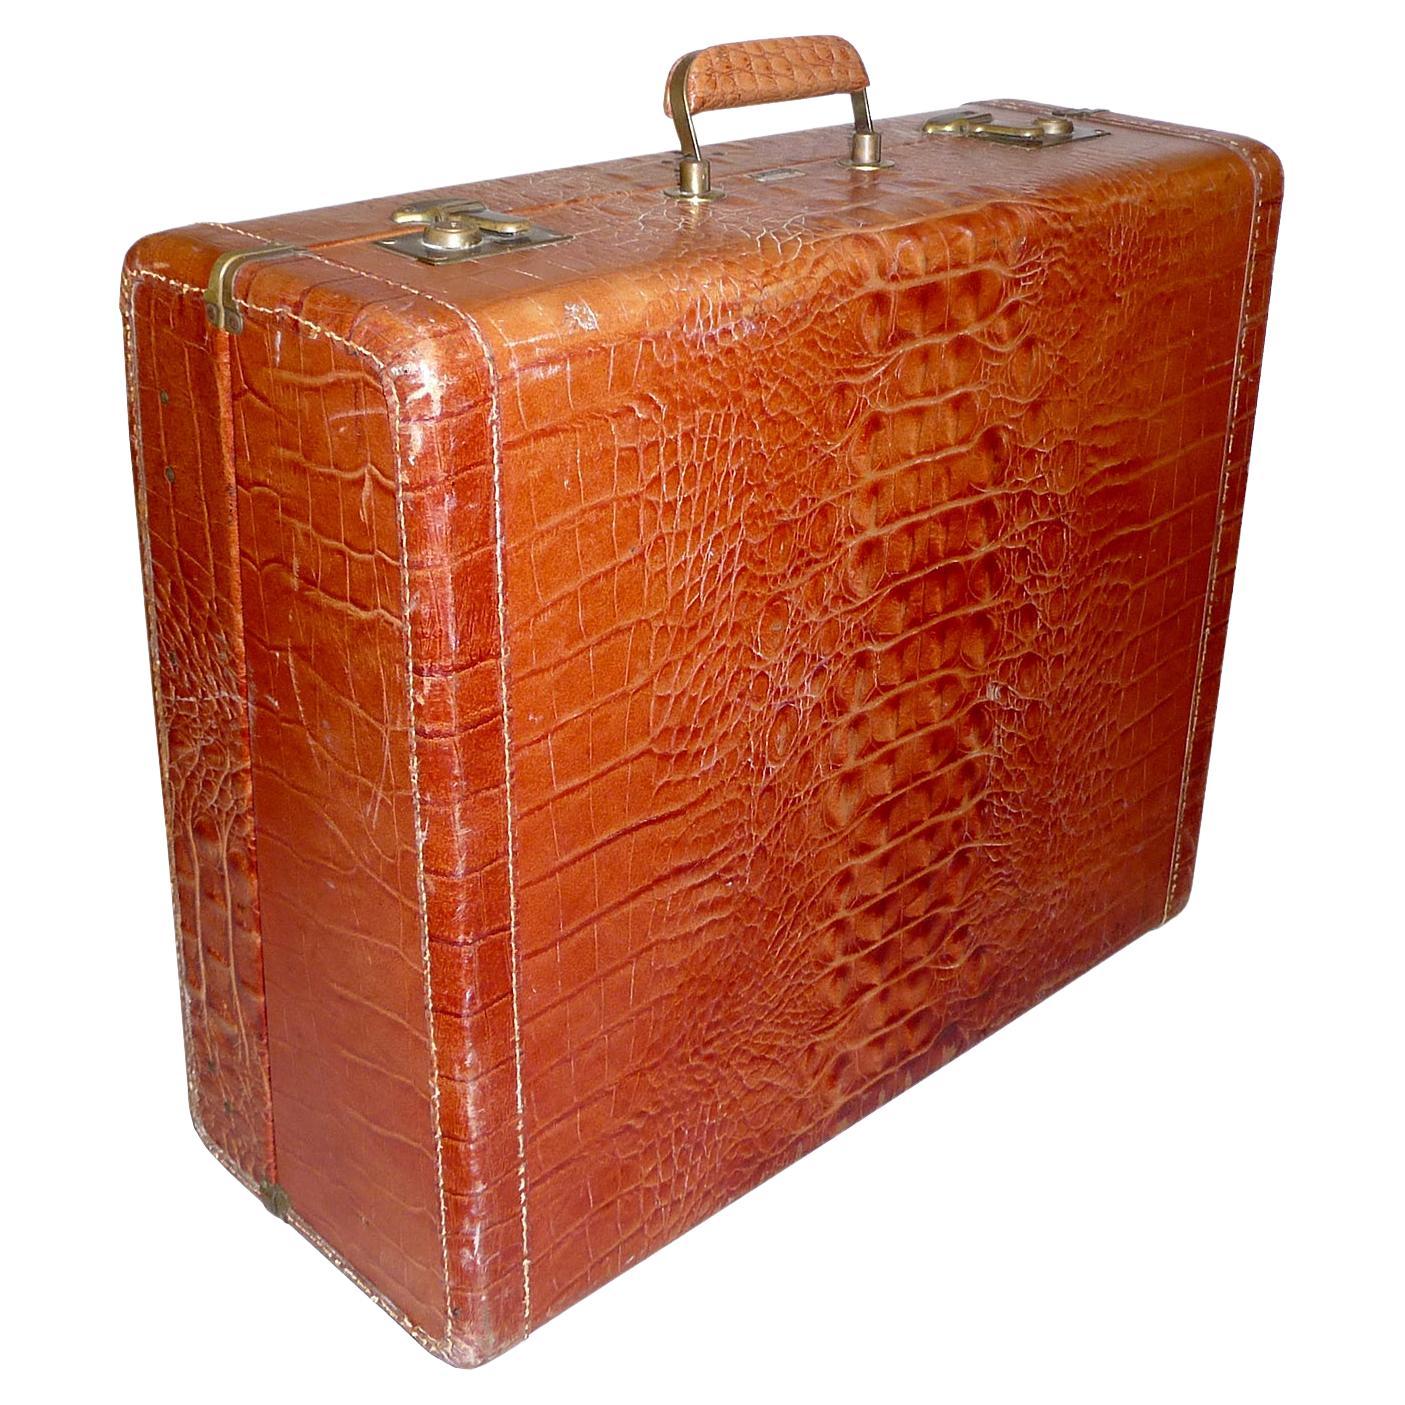 Vintage Luggage Genuine Leather in Alligator Look, Dionite, Canada, 1950s For Sale